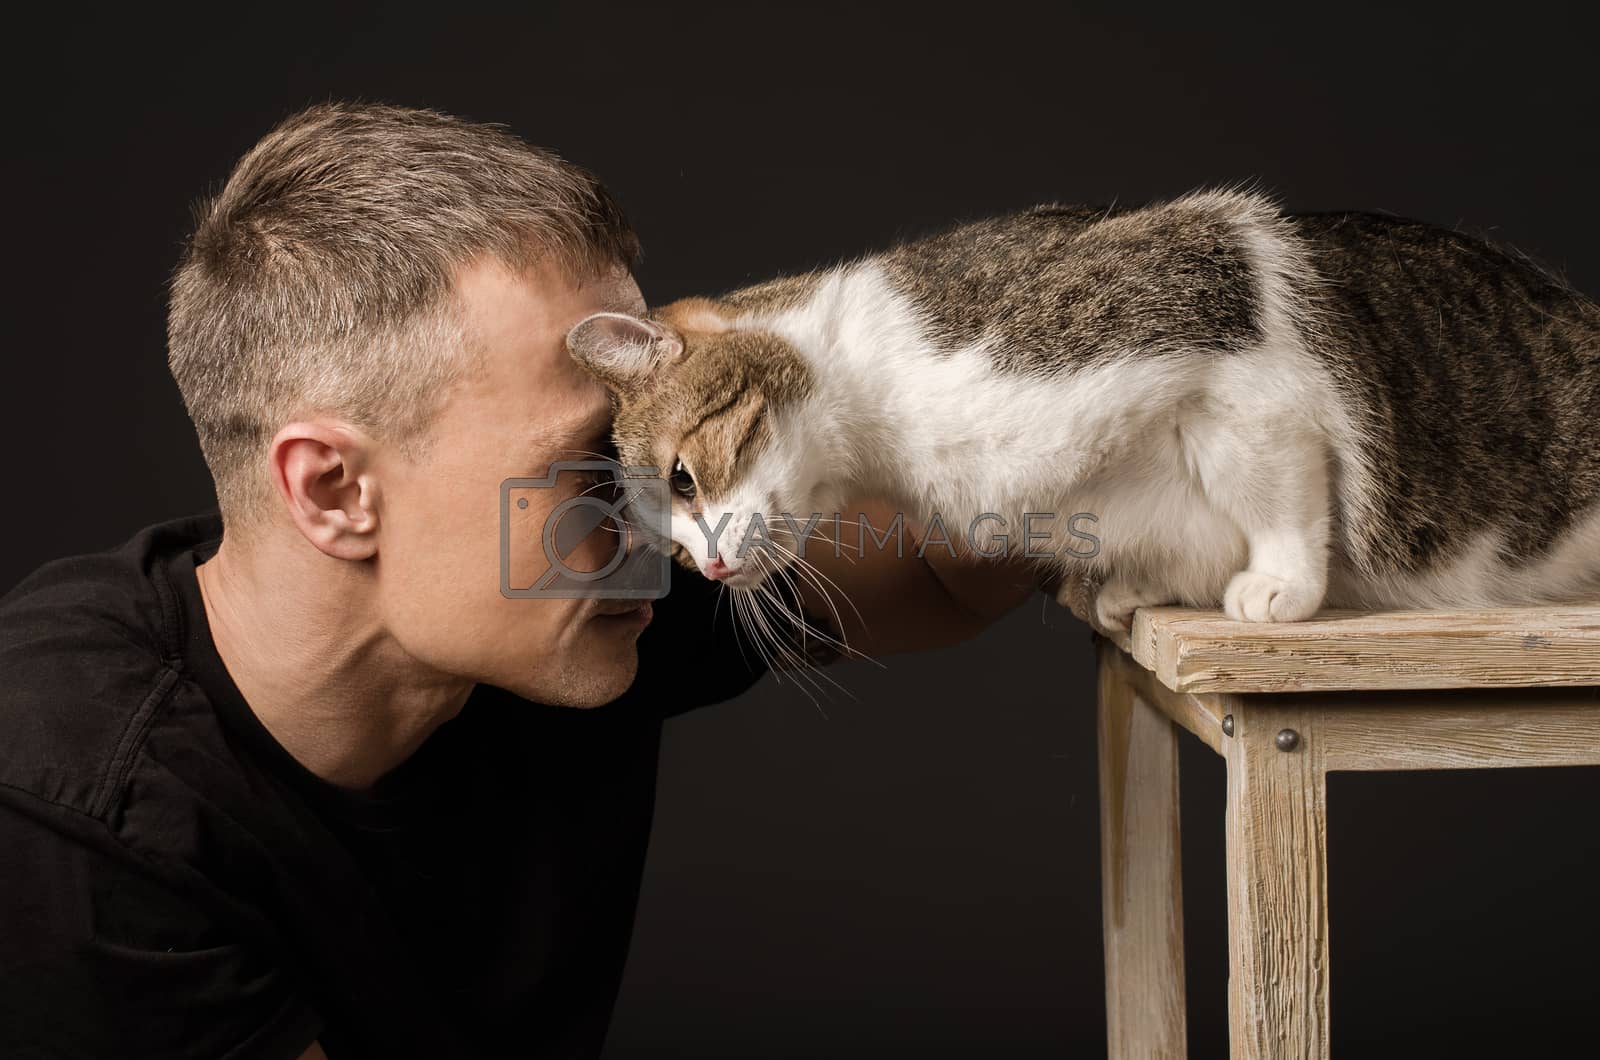 Royalty free image of Bromance, friendship, man and cat, touched their foreheads by Gera8th